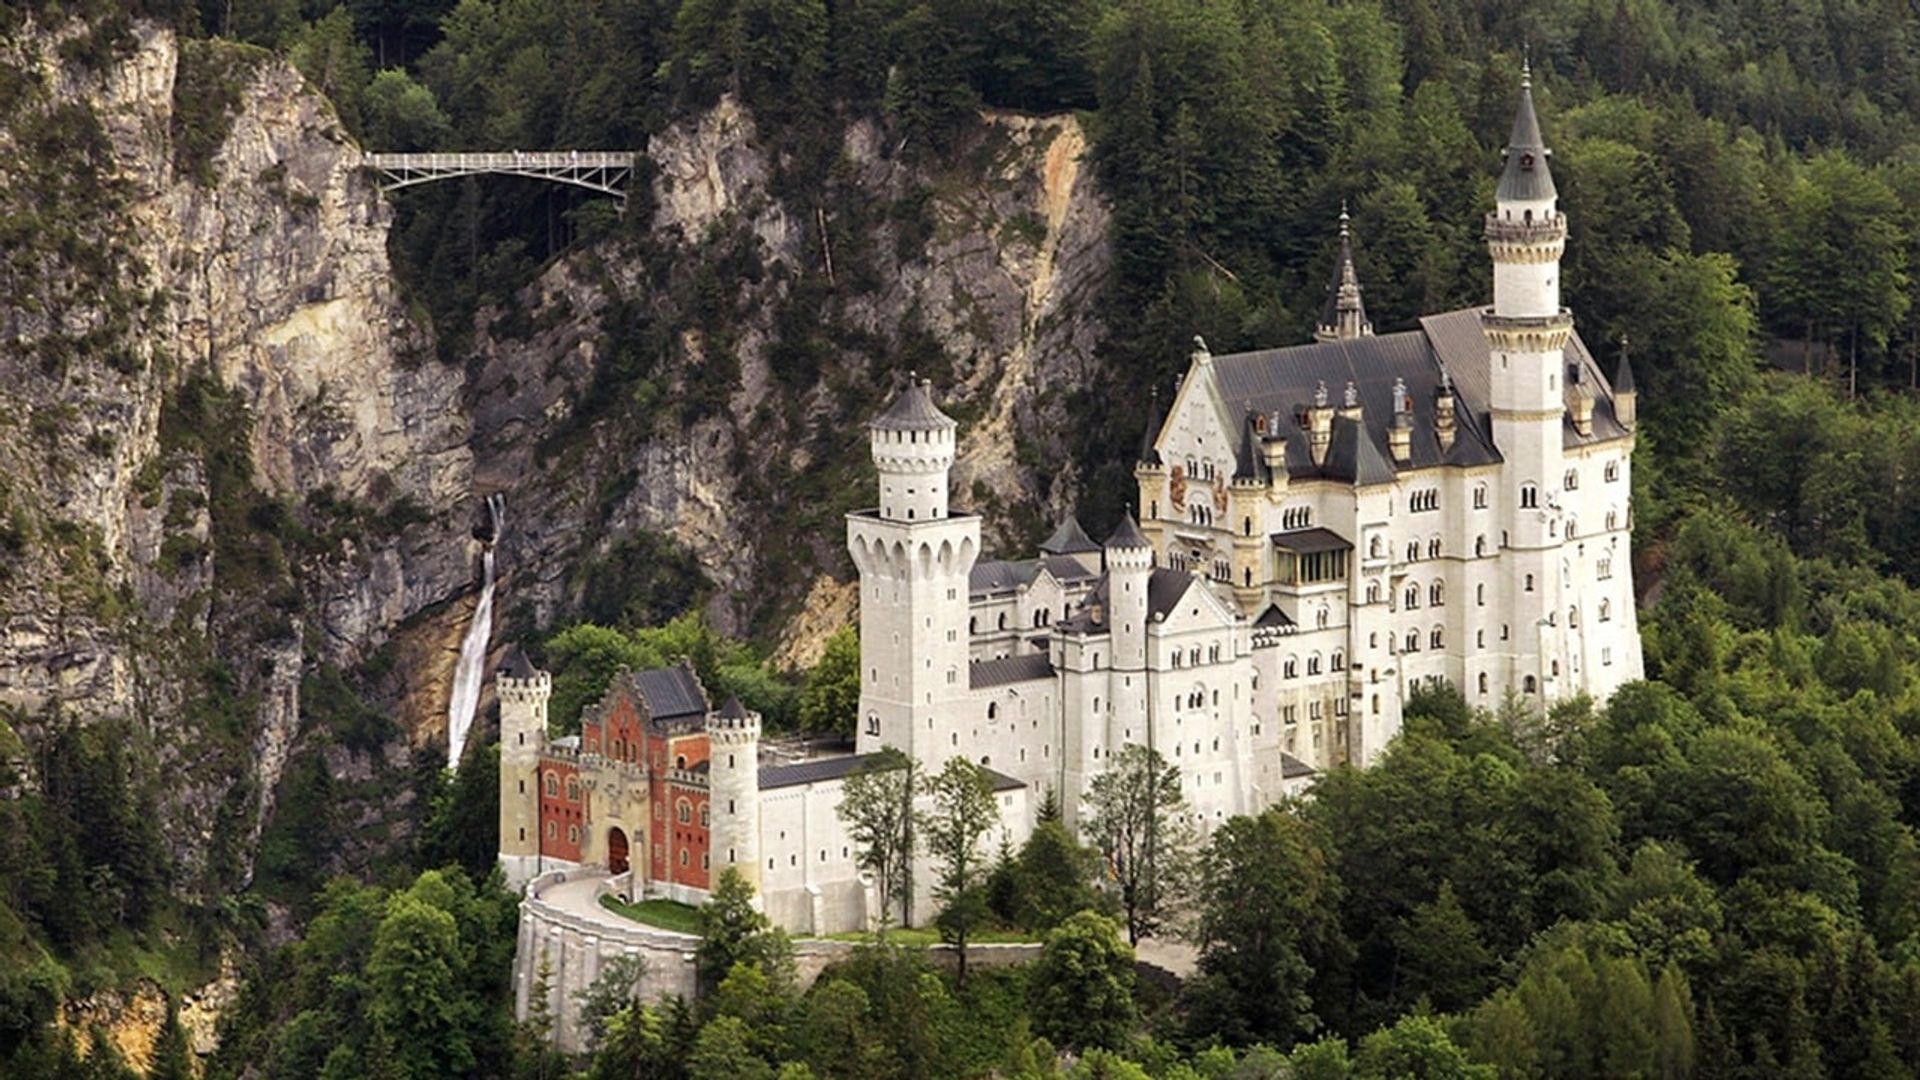 The Fairytale Castles of King Ludwig II background